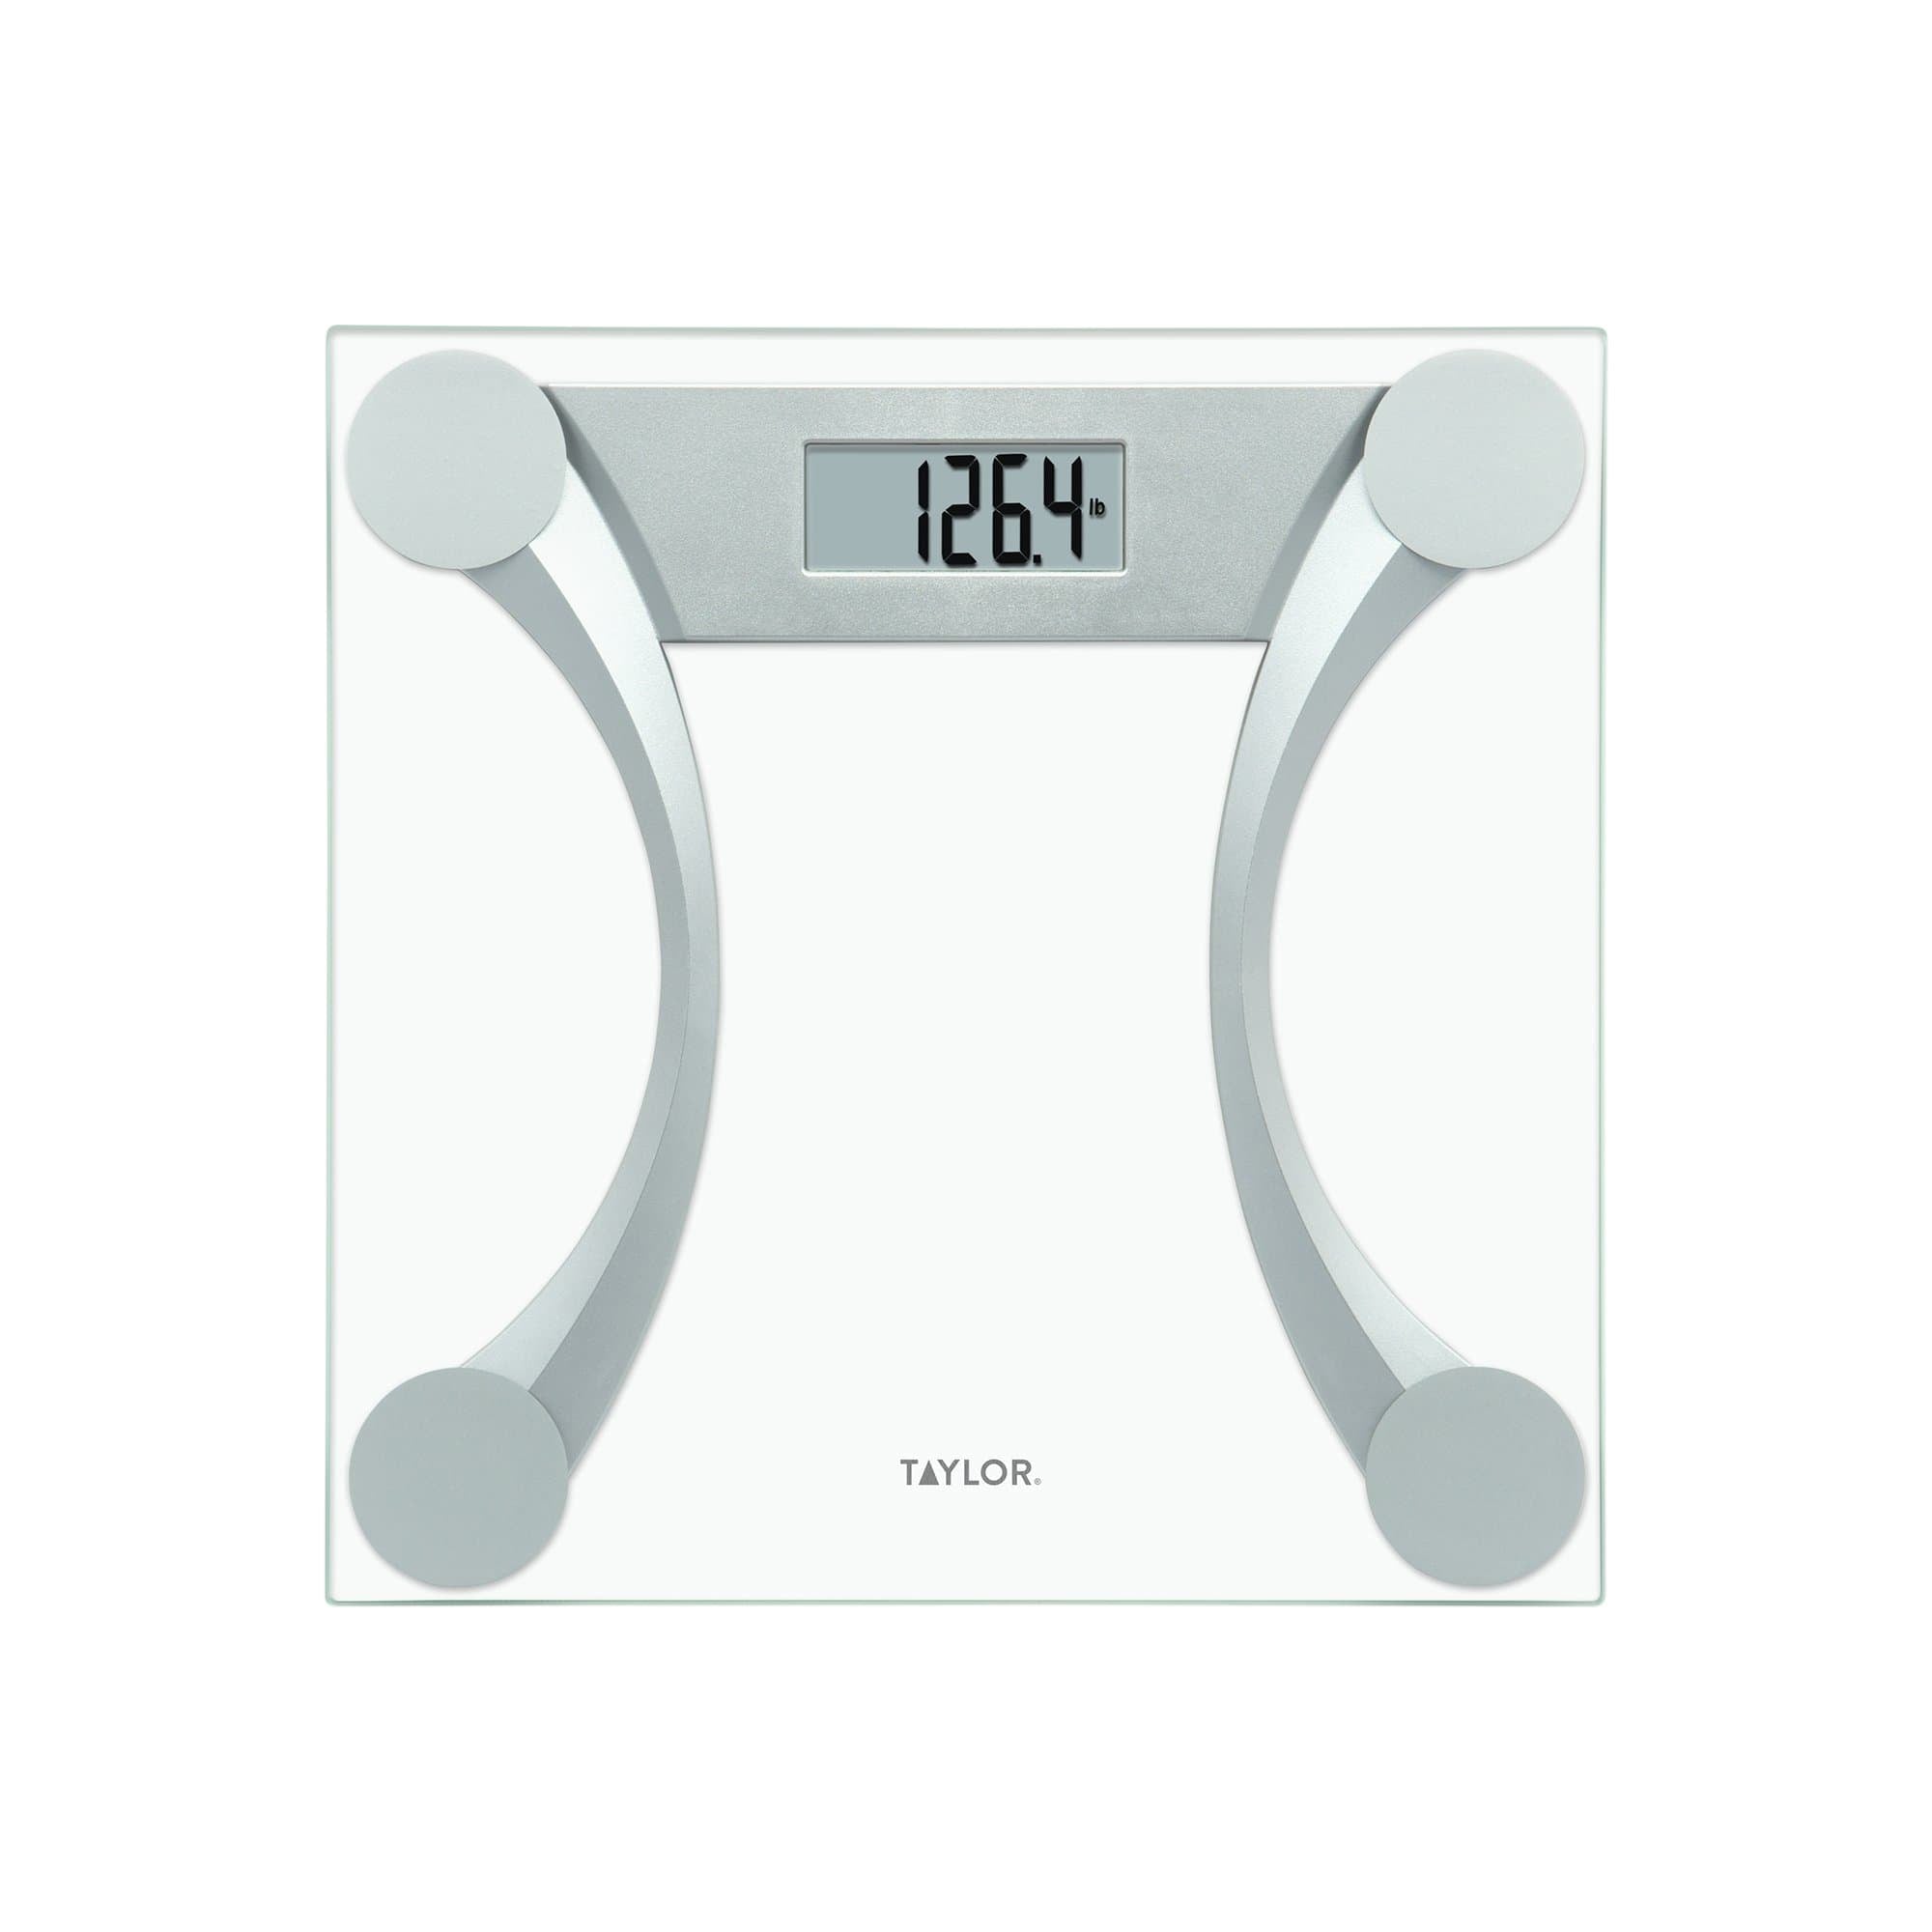 Clear Glass Digital Bathroom Scale with Metallic Accents